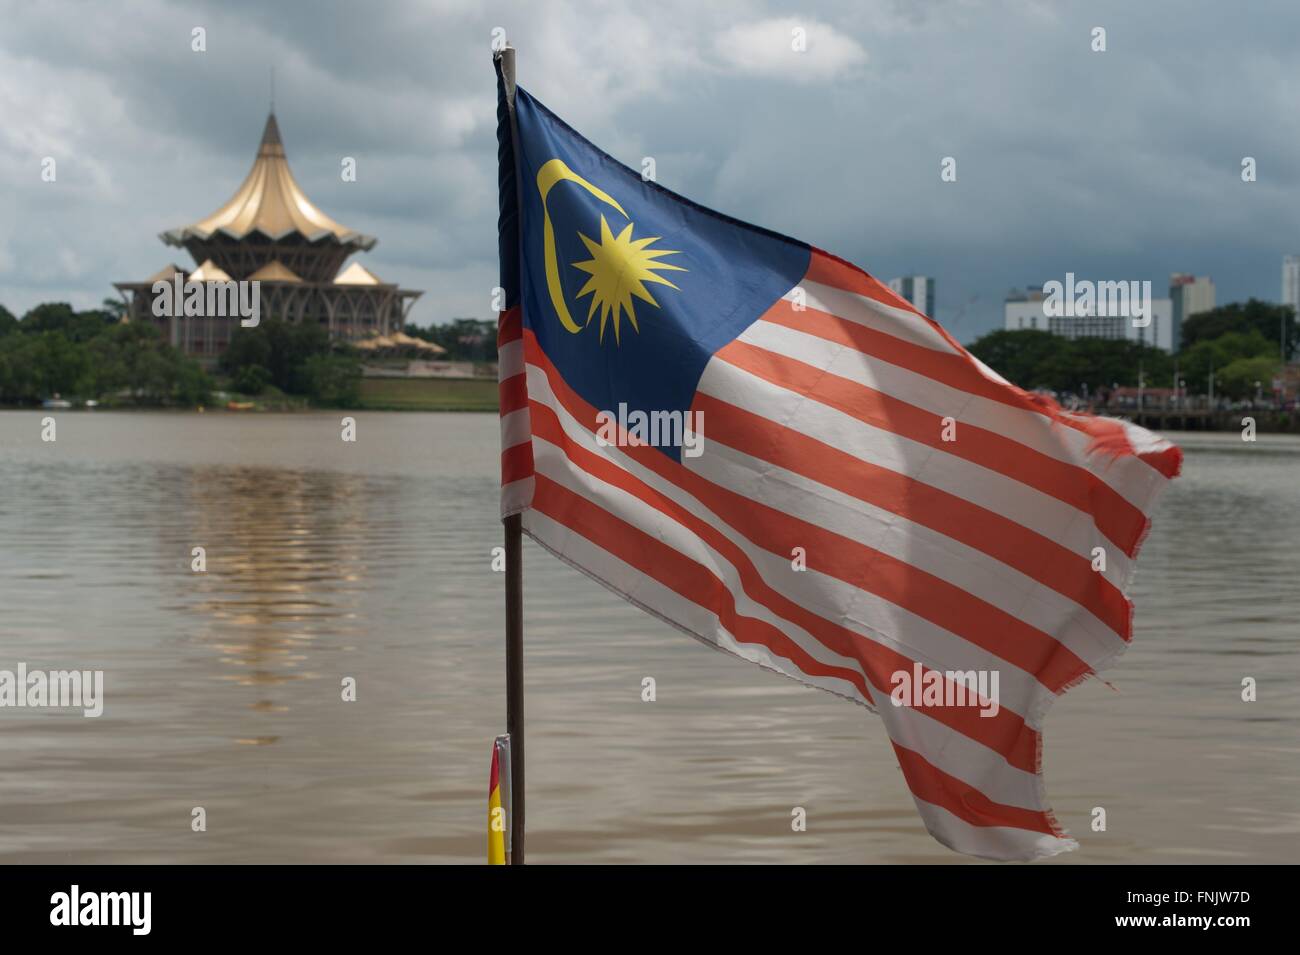 Kuching, Malaysia. 21st Oct, 2014. The Malaysia flag is waving in the wind on the shore of the Sarawak River in front of the Sarawak State Legislative Assembly Building in Kuching, Malaysia, 21 October 2014. Photo: Sebastian Kahnert - NO WIRE SERVICE -/dpa/Alamy Live News Stock Photo